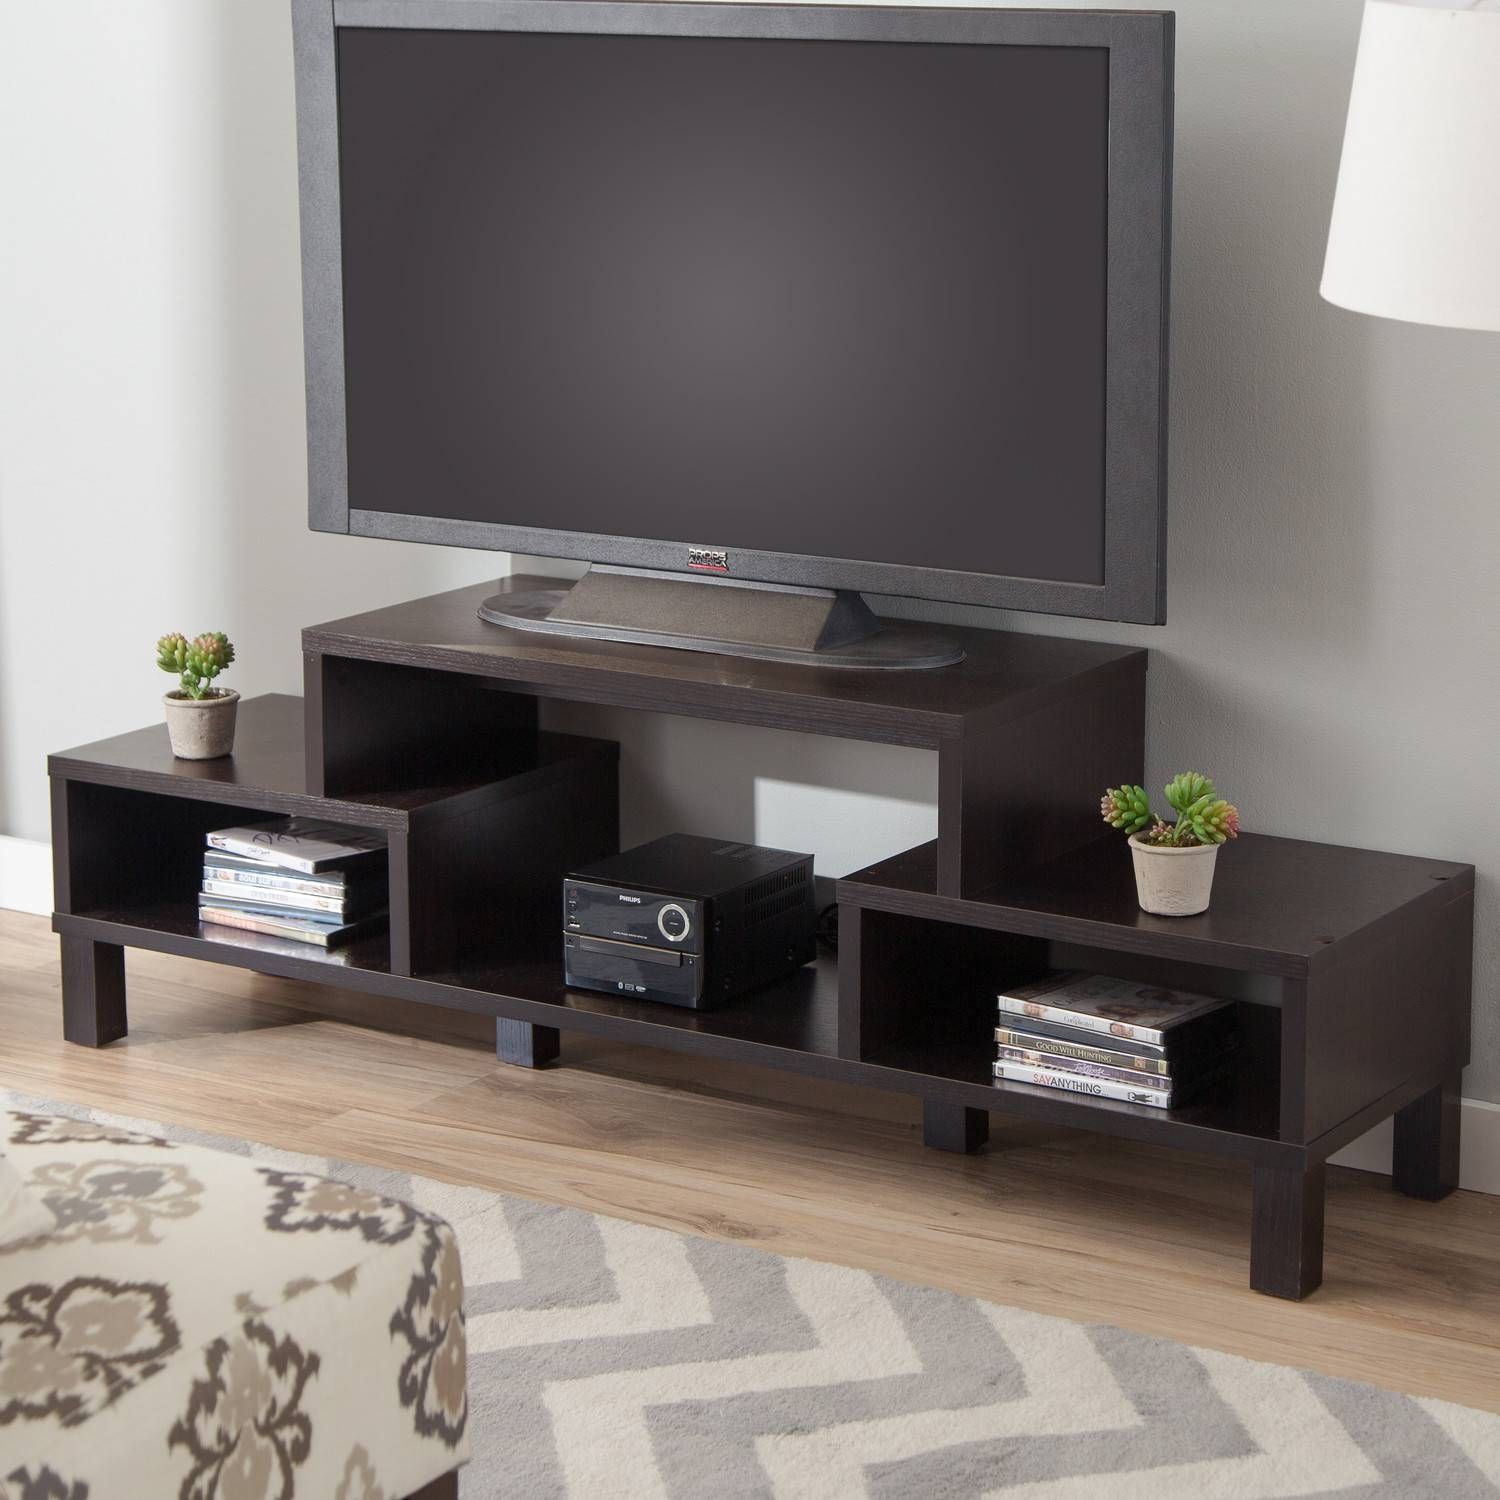 Big Led Tv On Unusual Tv Stands With Cute Flower Vase Above Books Throughout Led Tv Cabinets (View 14 of 15)